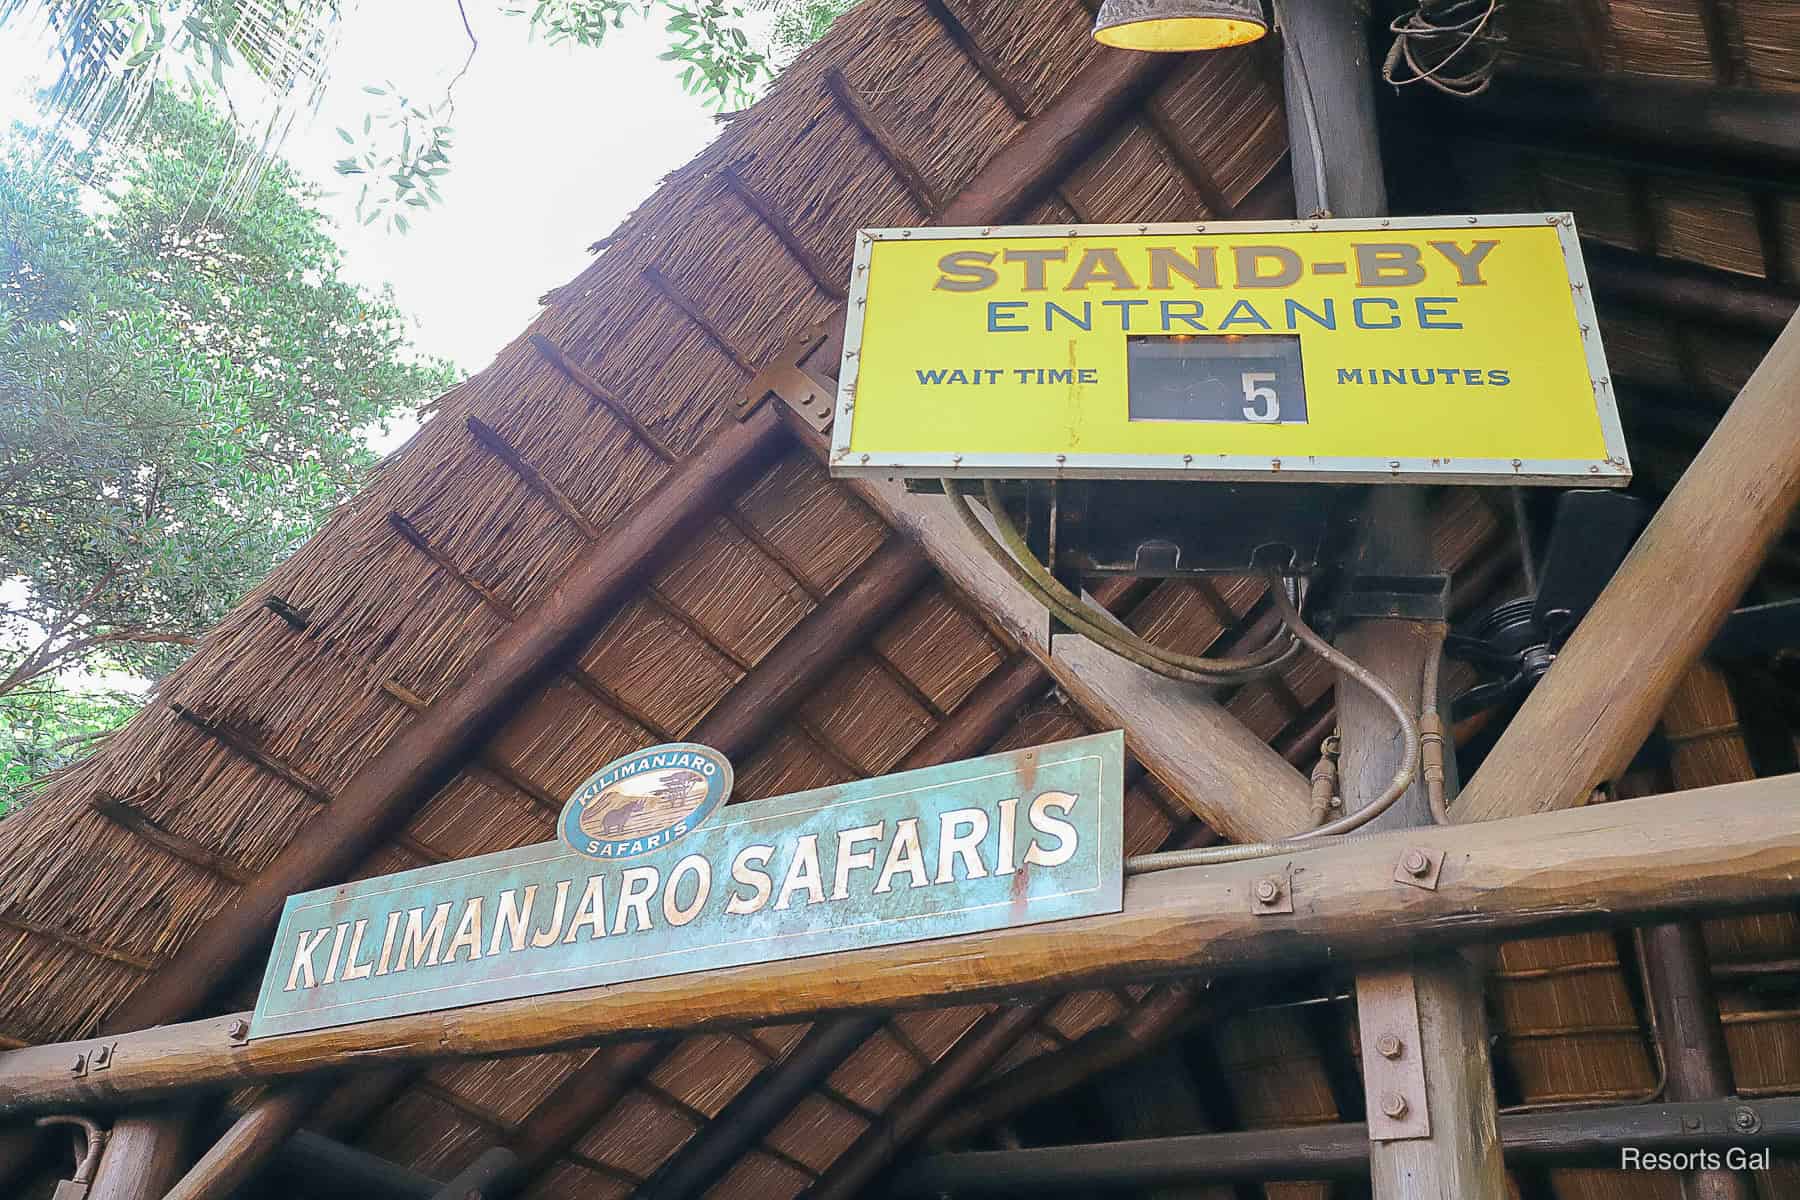 a five minute stand-by wait at the end of the day for Kilimanjaro Safaris 